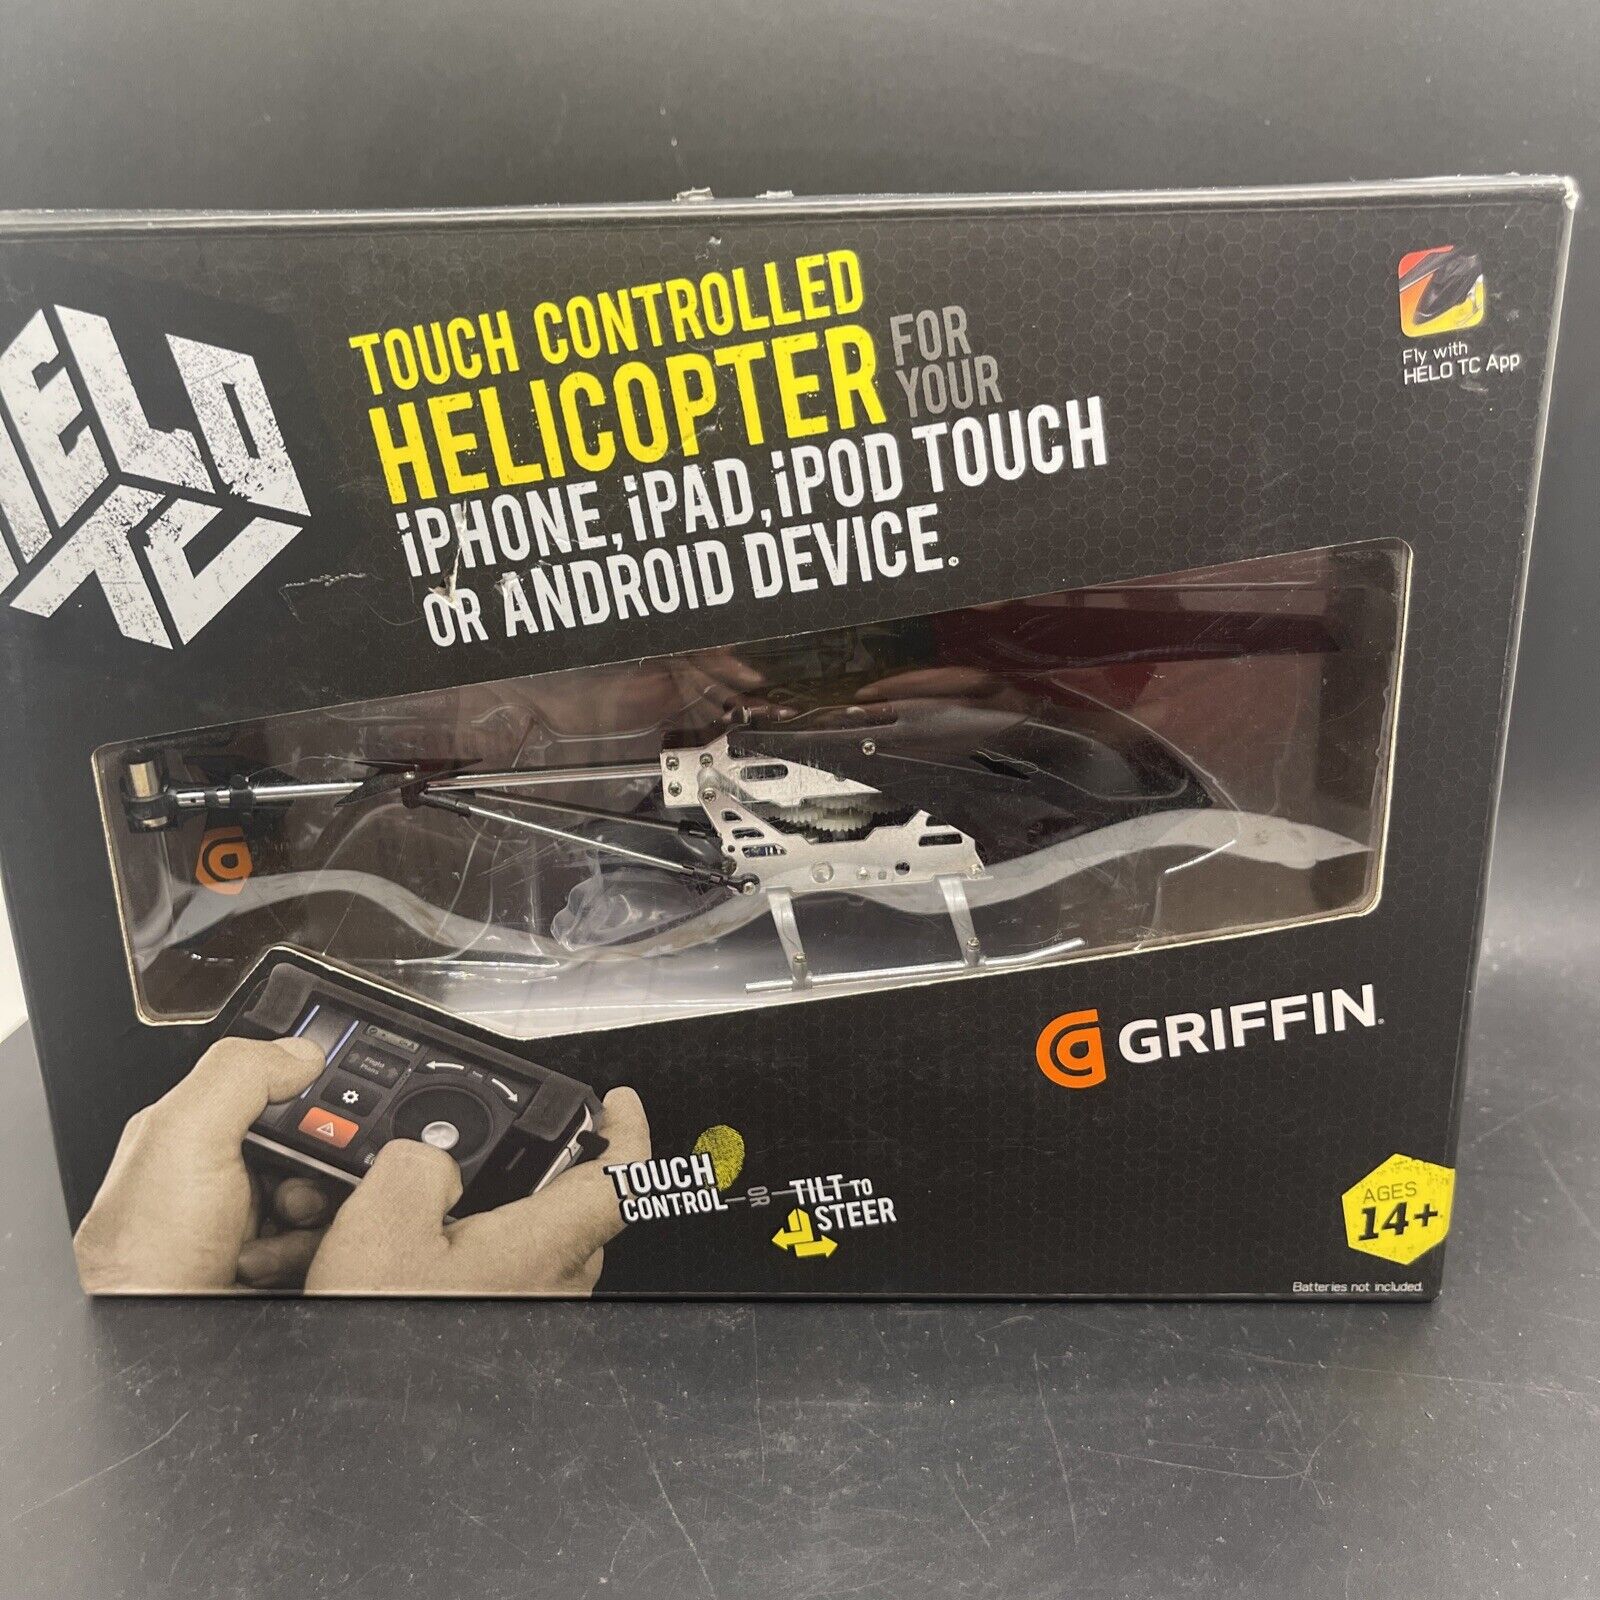 HELO TC Touch Controlled Helicopter GC30021 NOS Opened Box